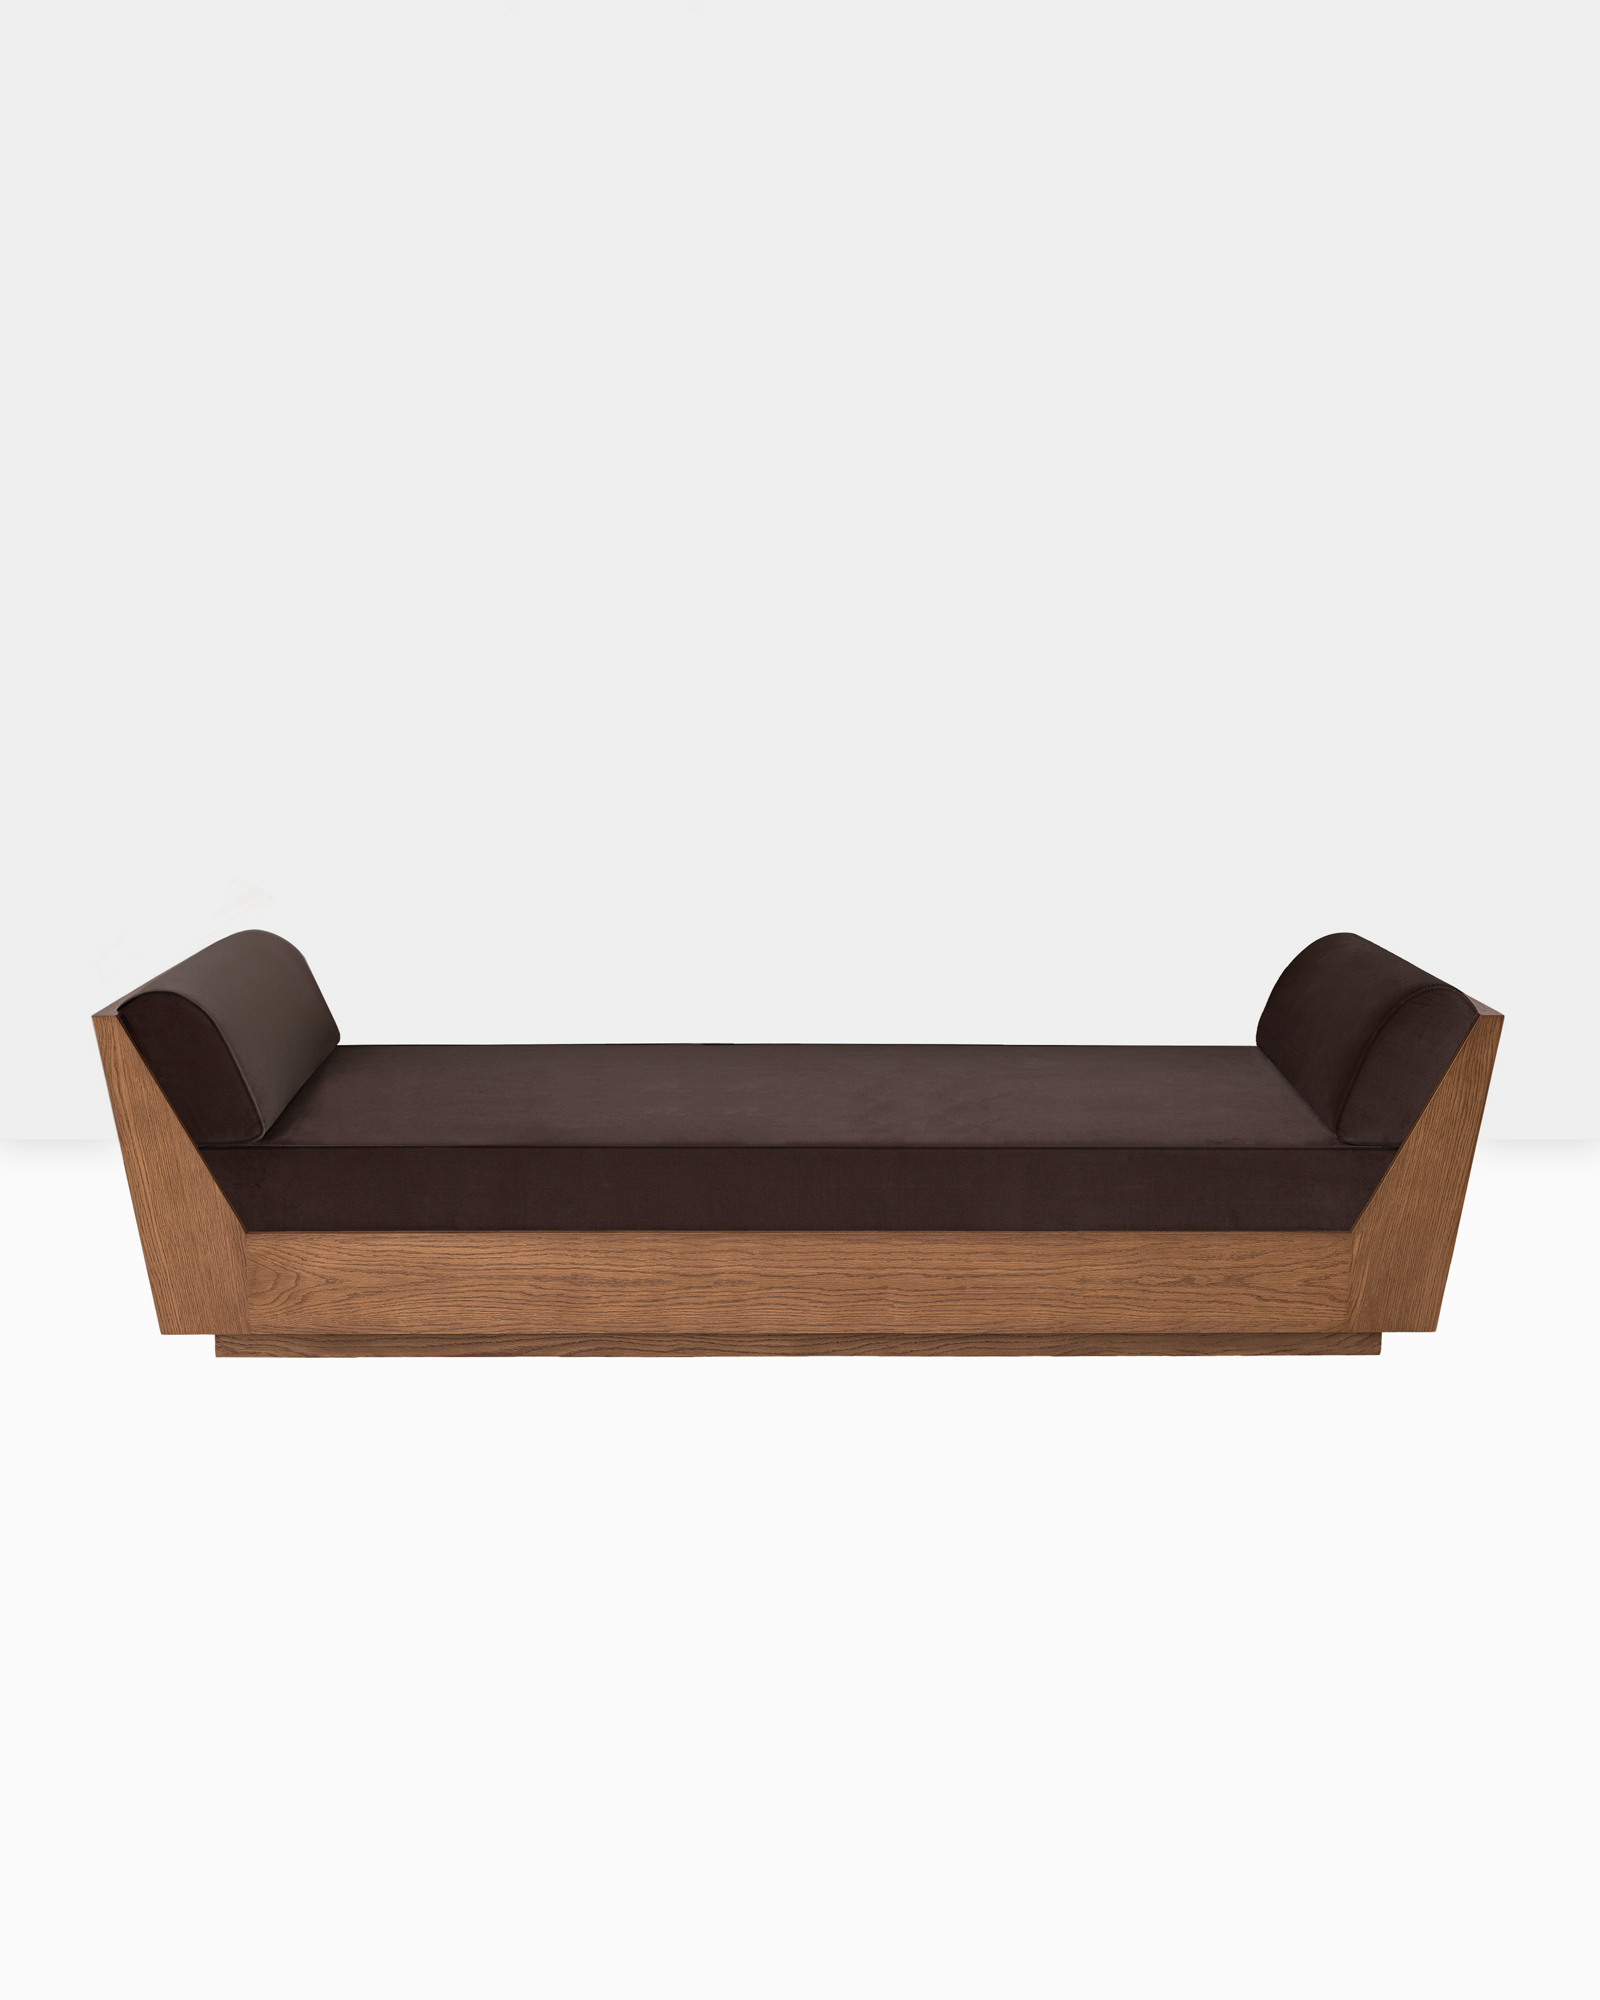 Atelier de Troupe - NEW – PEDREGAL Daybed